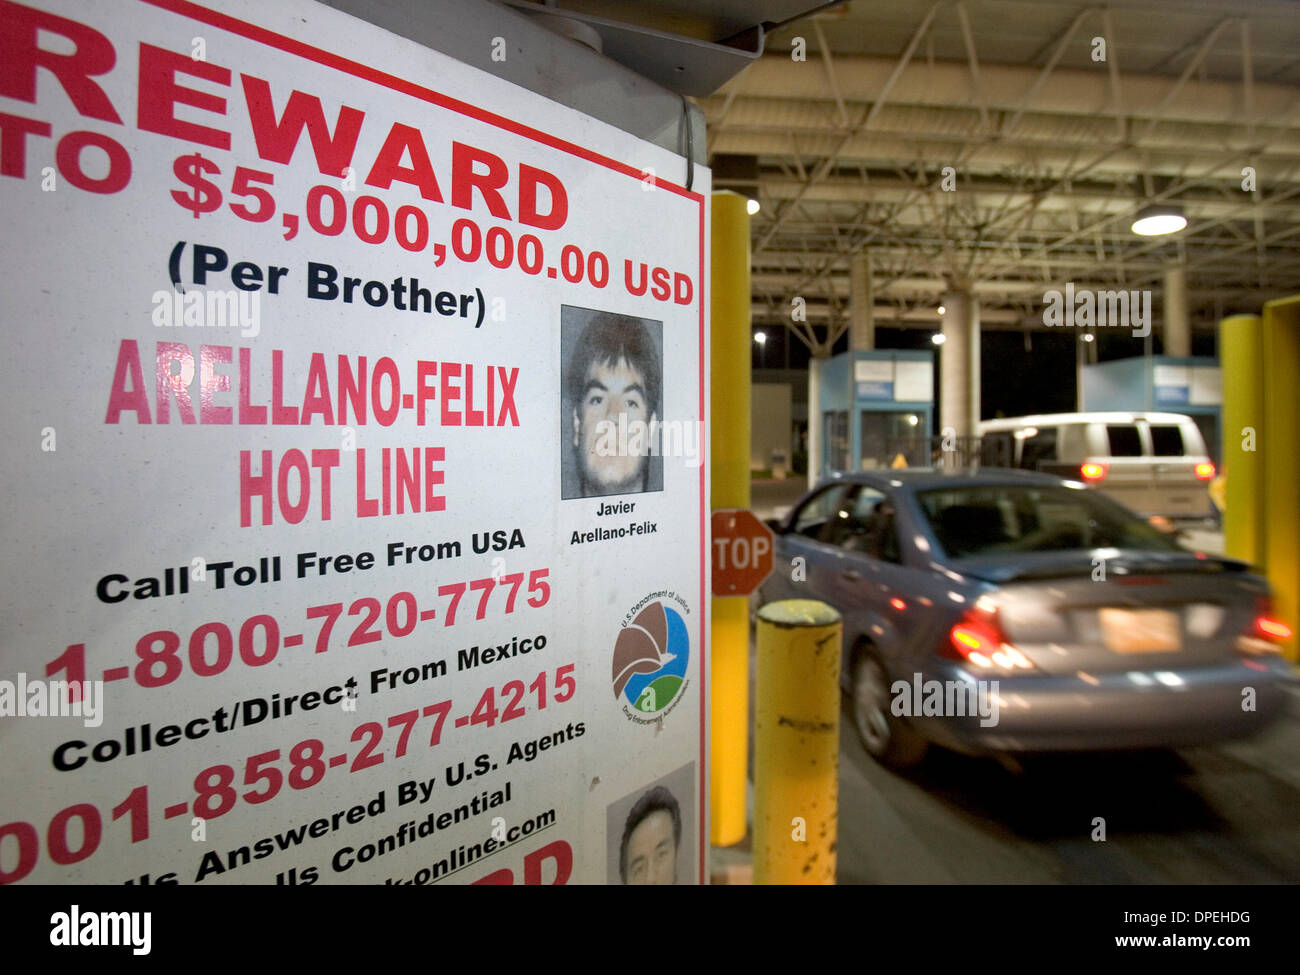 (Published 8/17/2006, A-1; republished 8/20/2006, G-4) August 16, 2006, San Diego, California, Otay Mesa Port of Entry, international border crossing from Mexico A sign announces the reward for the arrest of Javier Arellano-Felix directed at vehicles entering the U.S. on one of the lanes at the Otay Mesa Port of Entry. This is one of many of these signs, in English and in Spanish,  Stock Photo